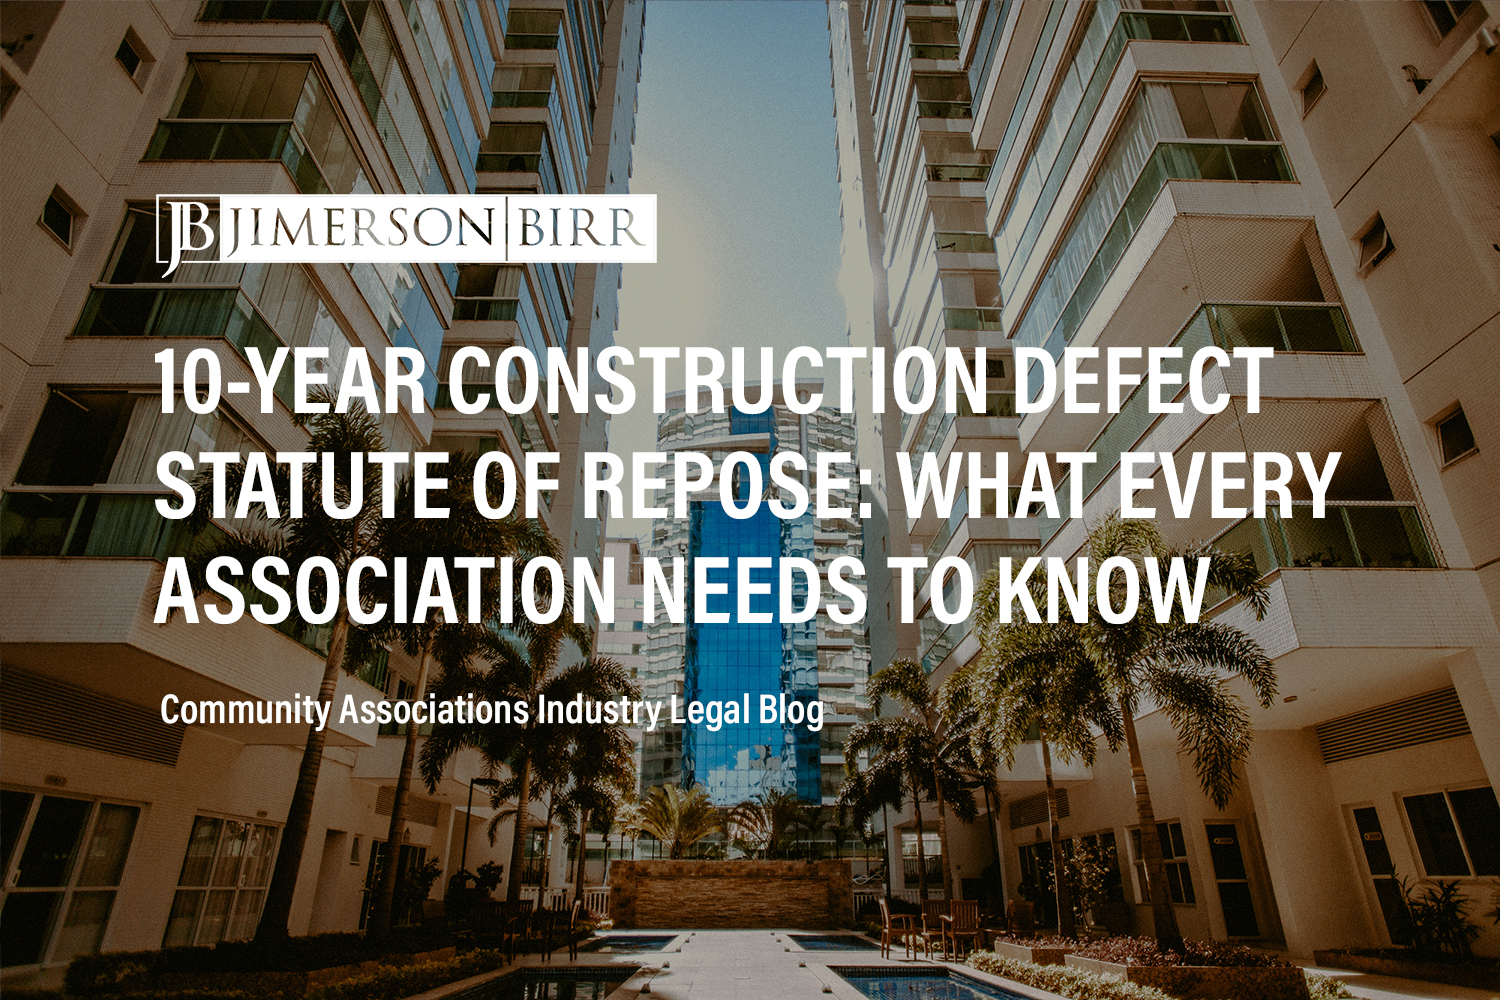 What Every Florida Community Association and Building Owner Needs to Know About Florida’s 10-Year Construction Defect Statute of Repose